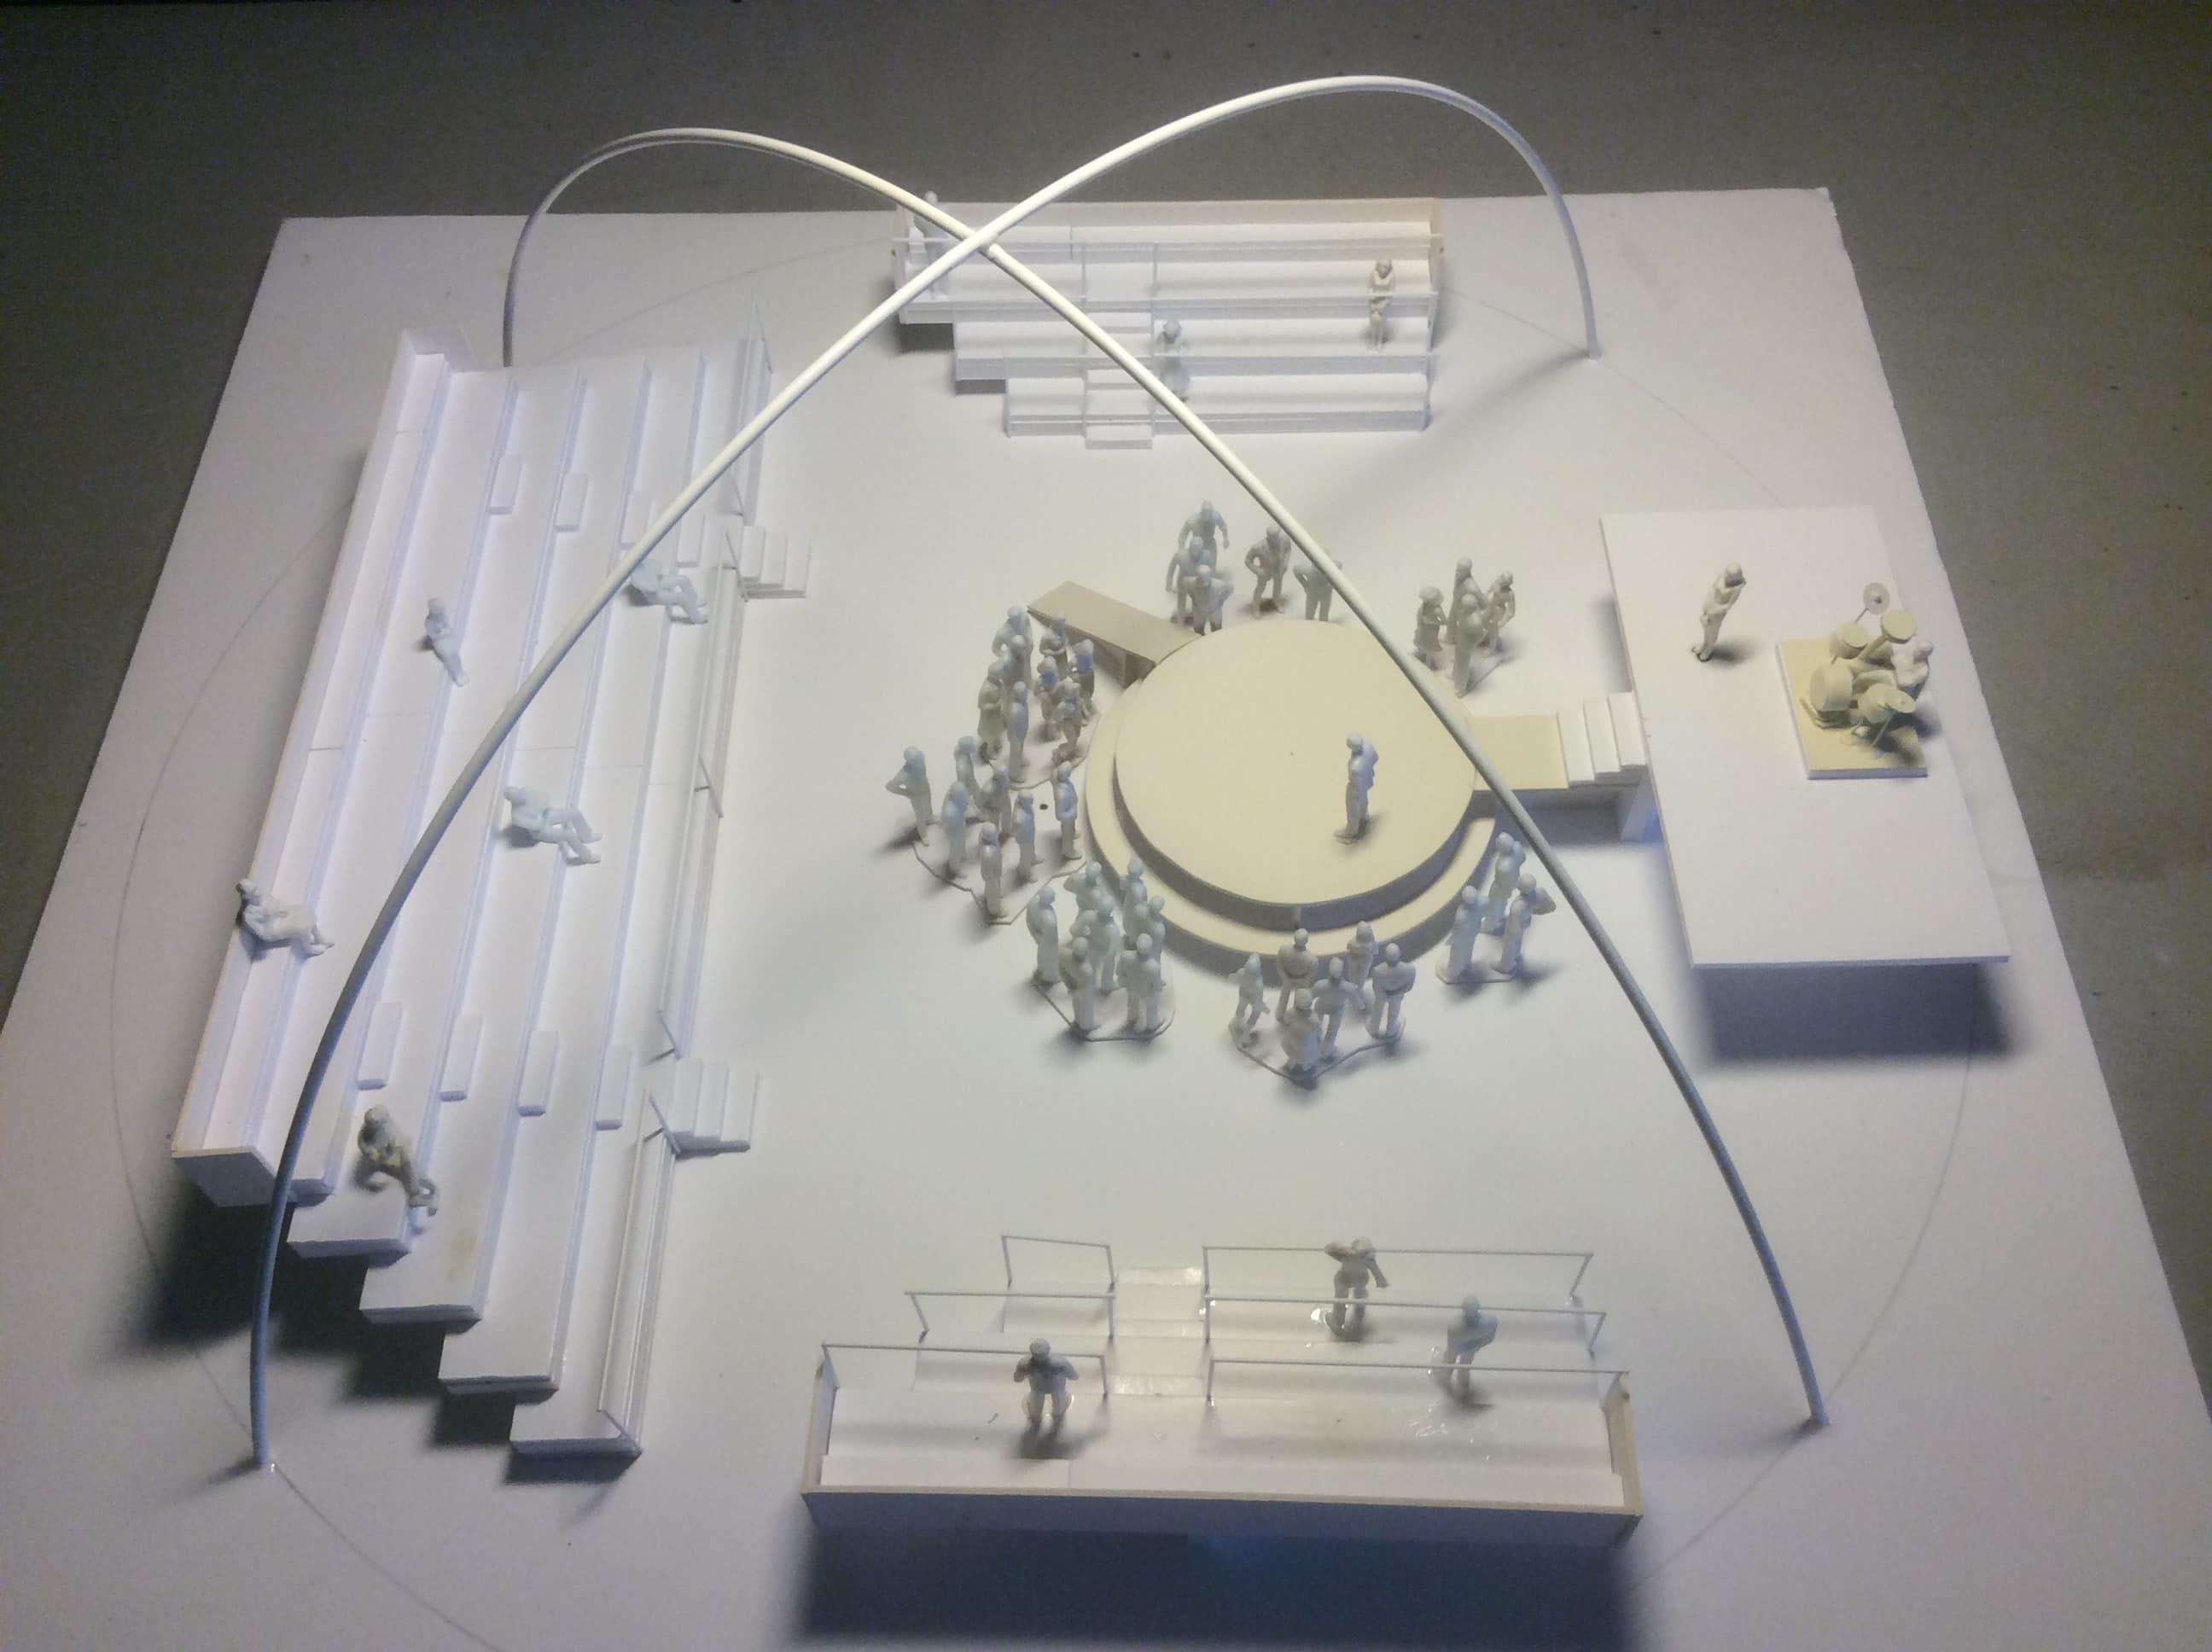 Photograph of set design model for Kneehigh's Ubu. White scale model for stage/set design. Containing model figures and seating configuration.